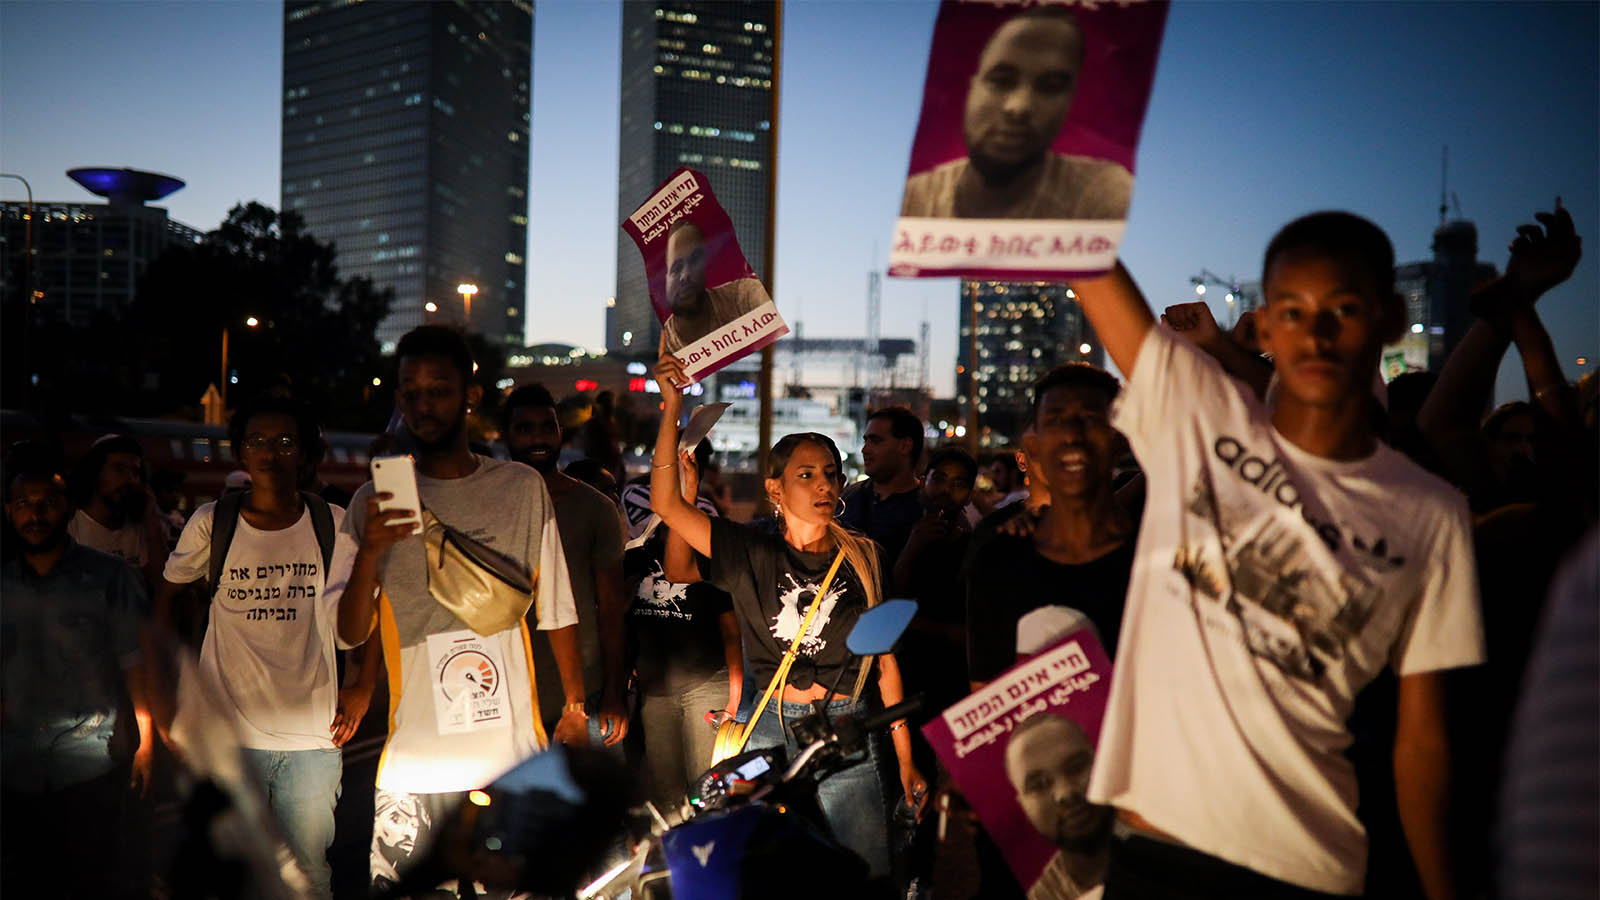 Ethiopian Israelis and supporters protest following the death of 19-year-old Ethiopian, Solomon Tekah who was shot and killed few days ago in Kiryat Haim by an off-duty police officer, in Tel Aviv, July 2, 2019. Photo by Hadas Parush/Flash90